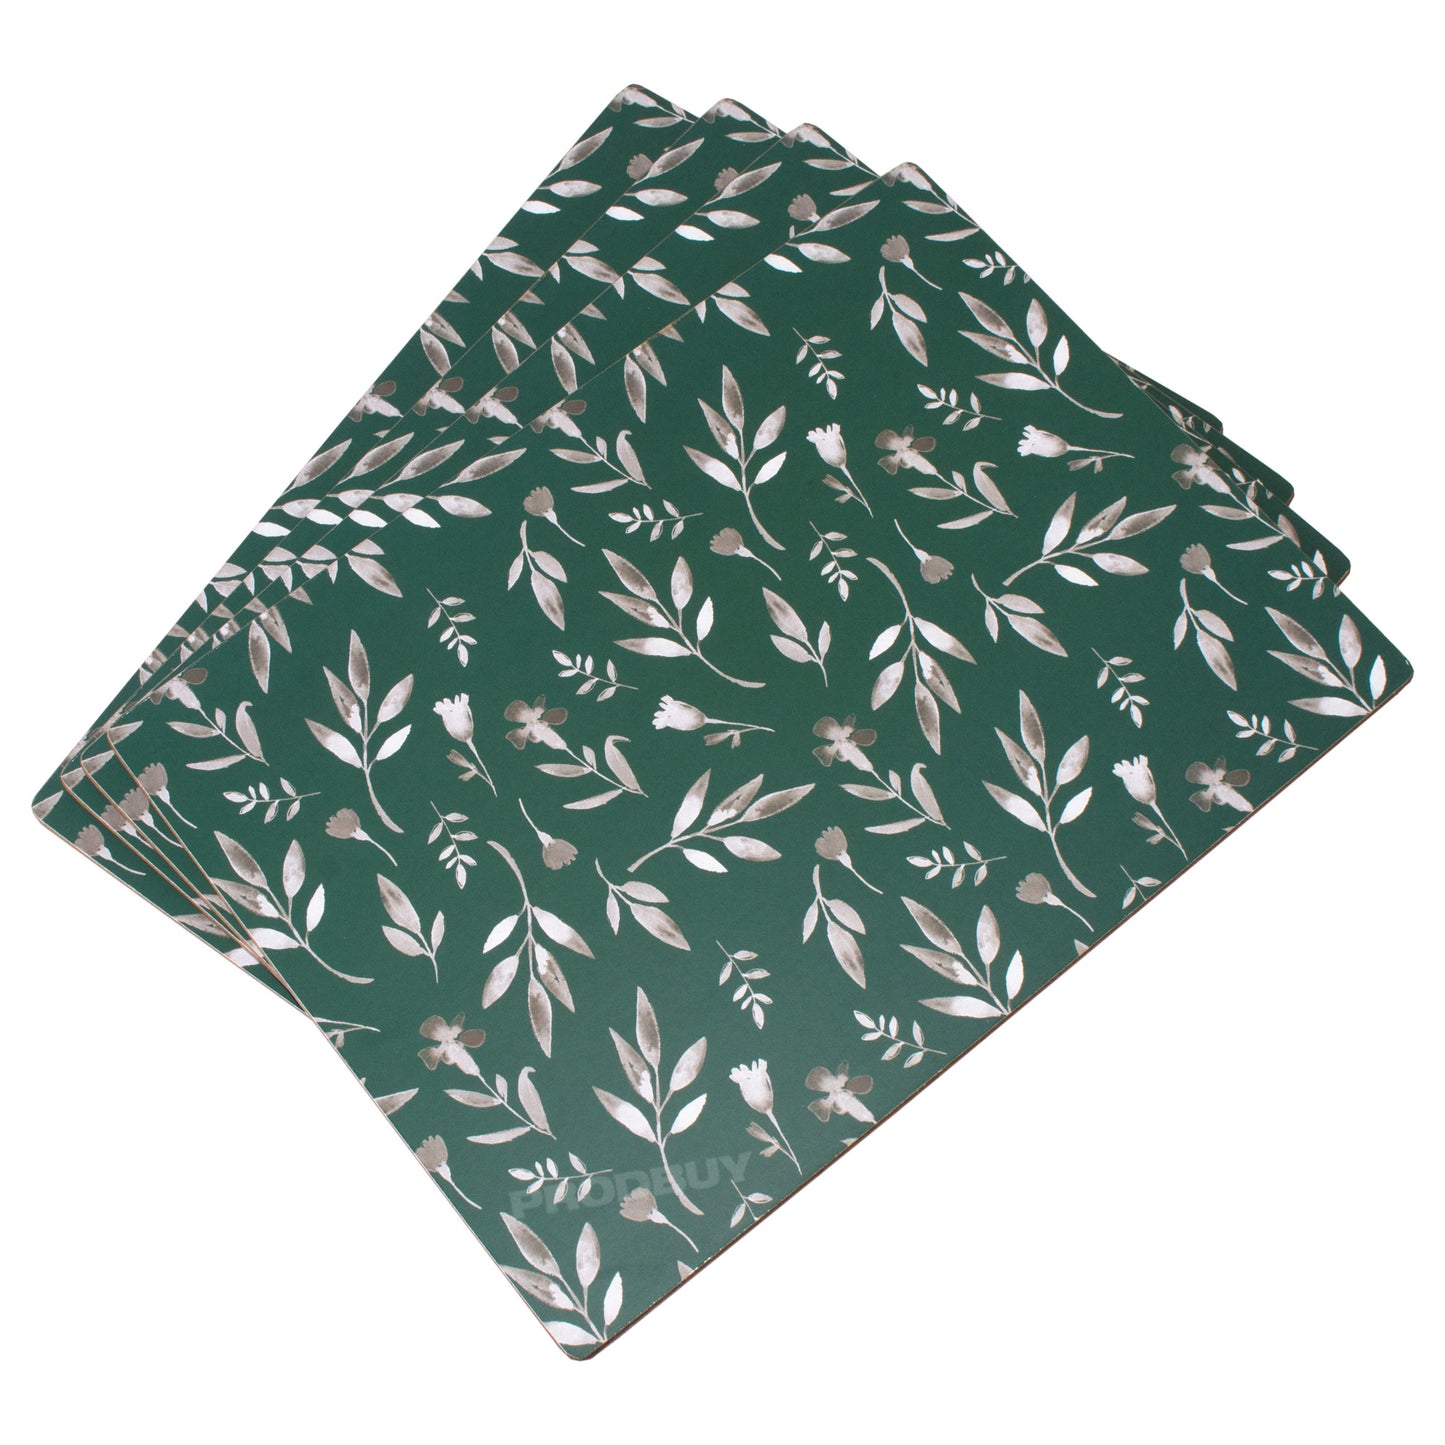 Set of Dark Green Leaves 4 Placemats & 4 Coasters